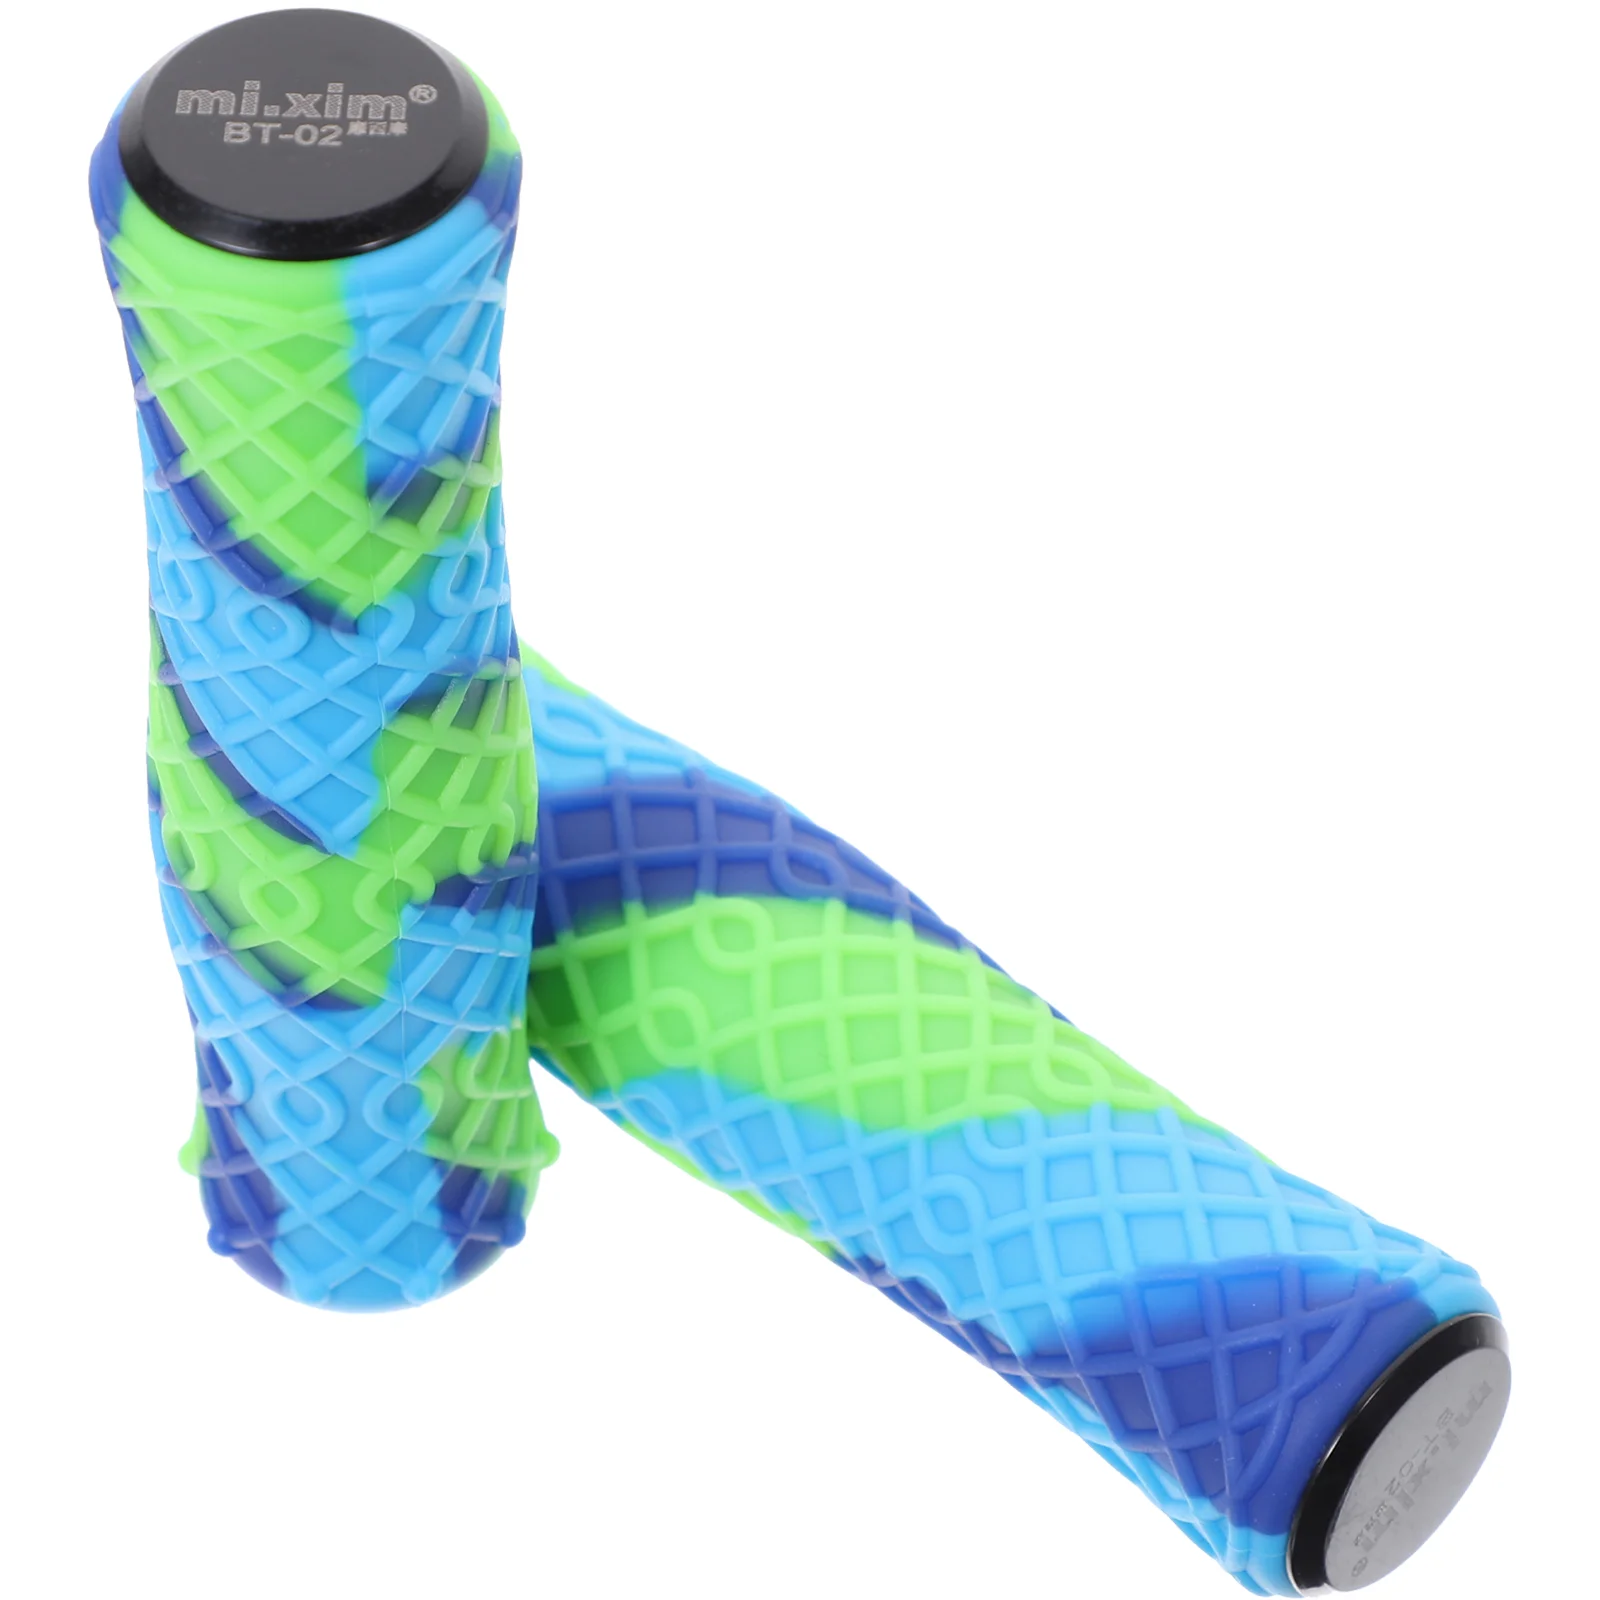 

1 Pair Bike Handlebar Grips Non Bike Grips Silicone Grips Bicycles Accessories for Cycling Mountain Road Bikes Colorful